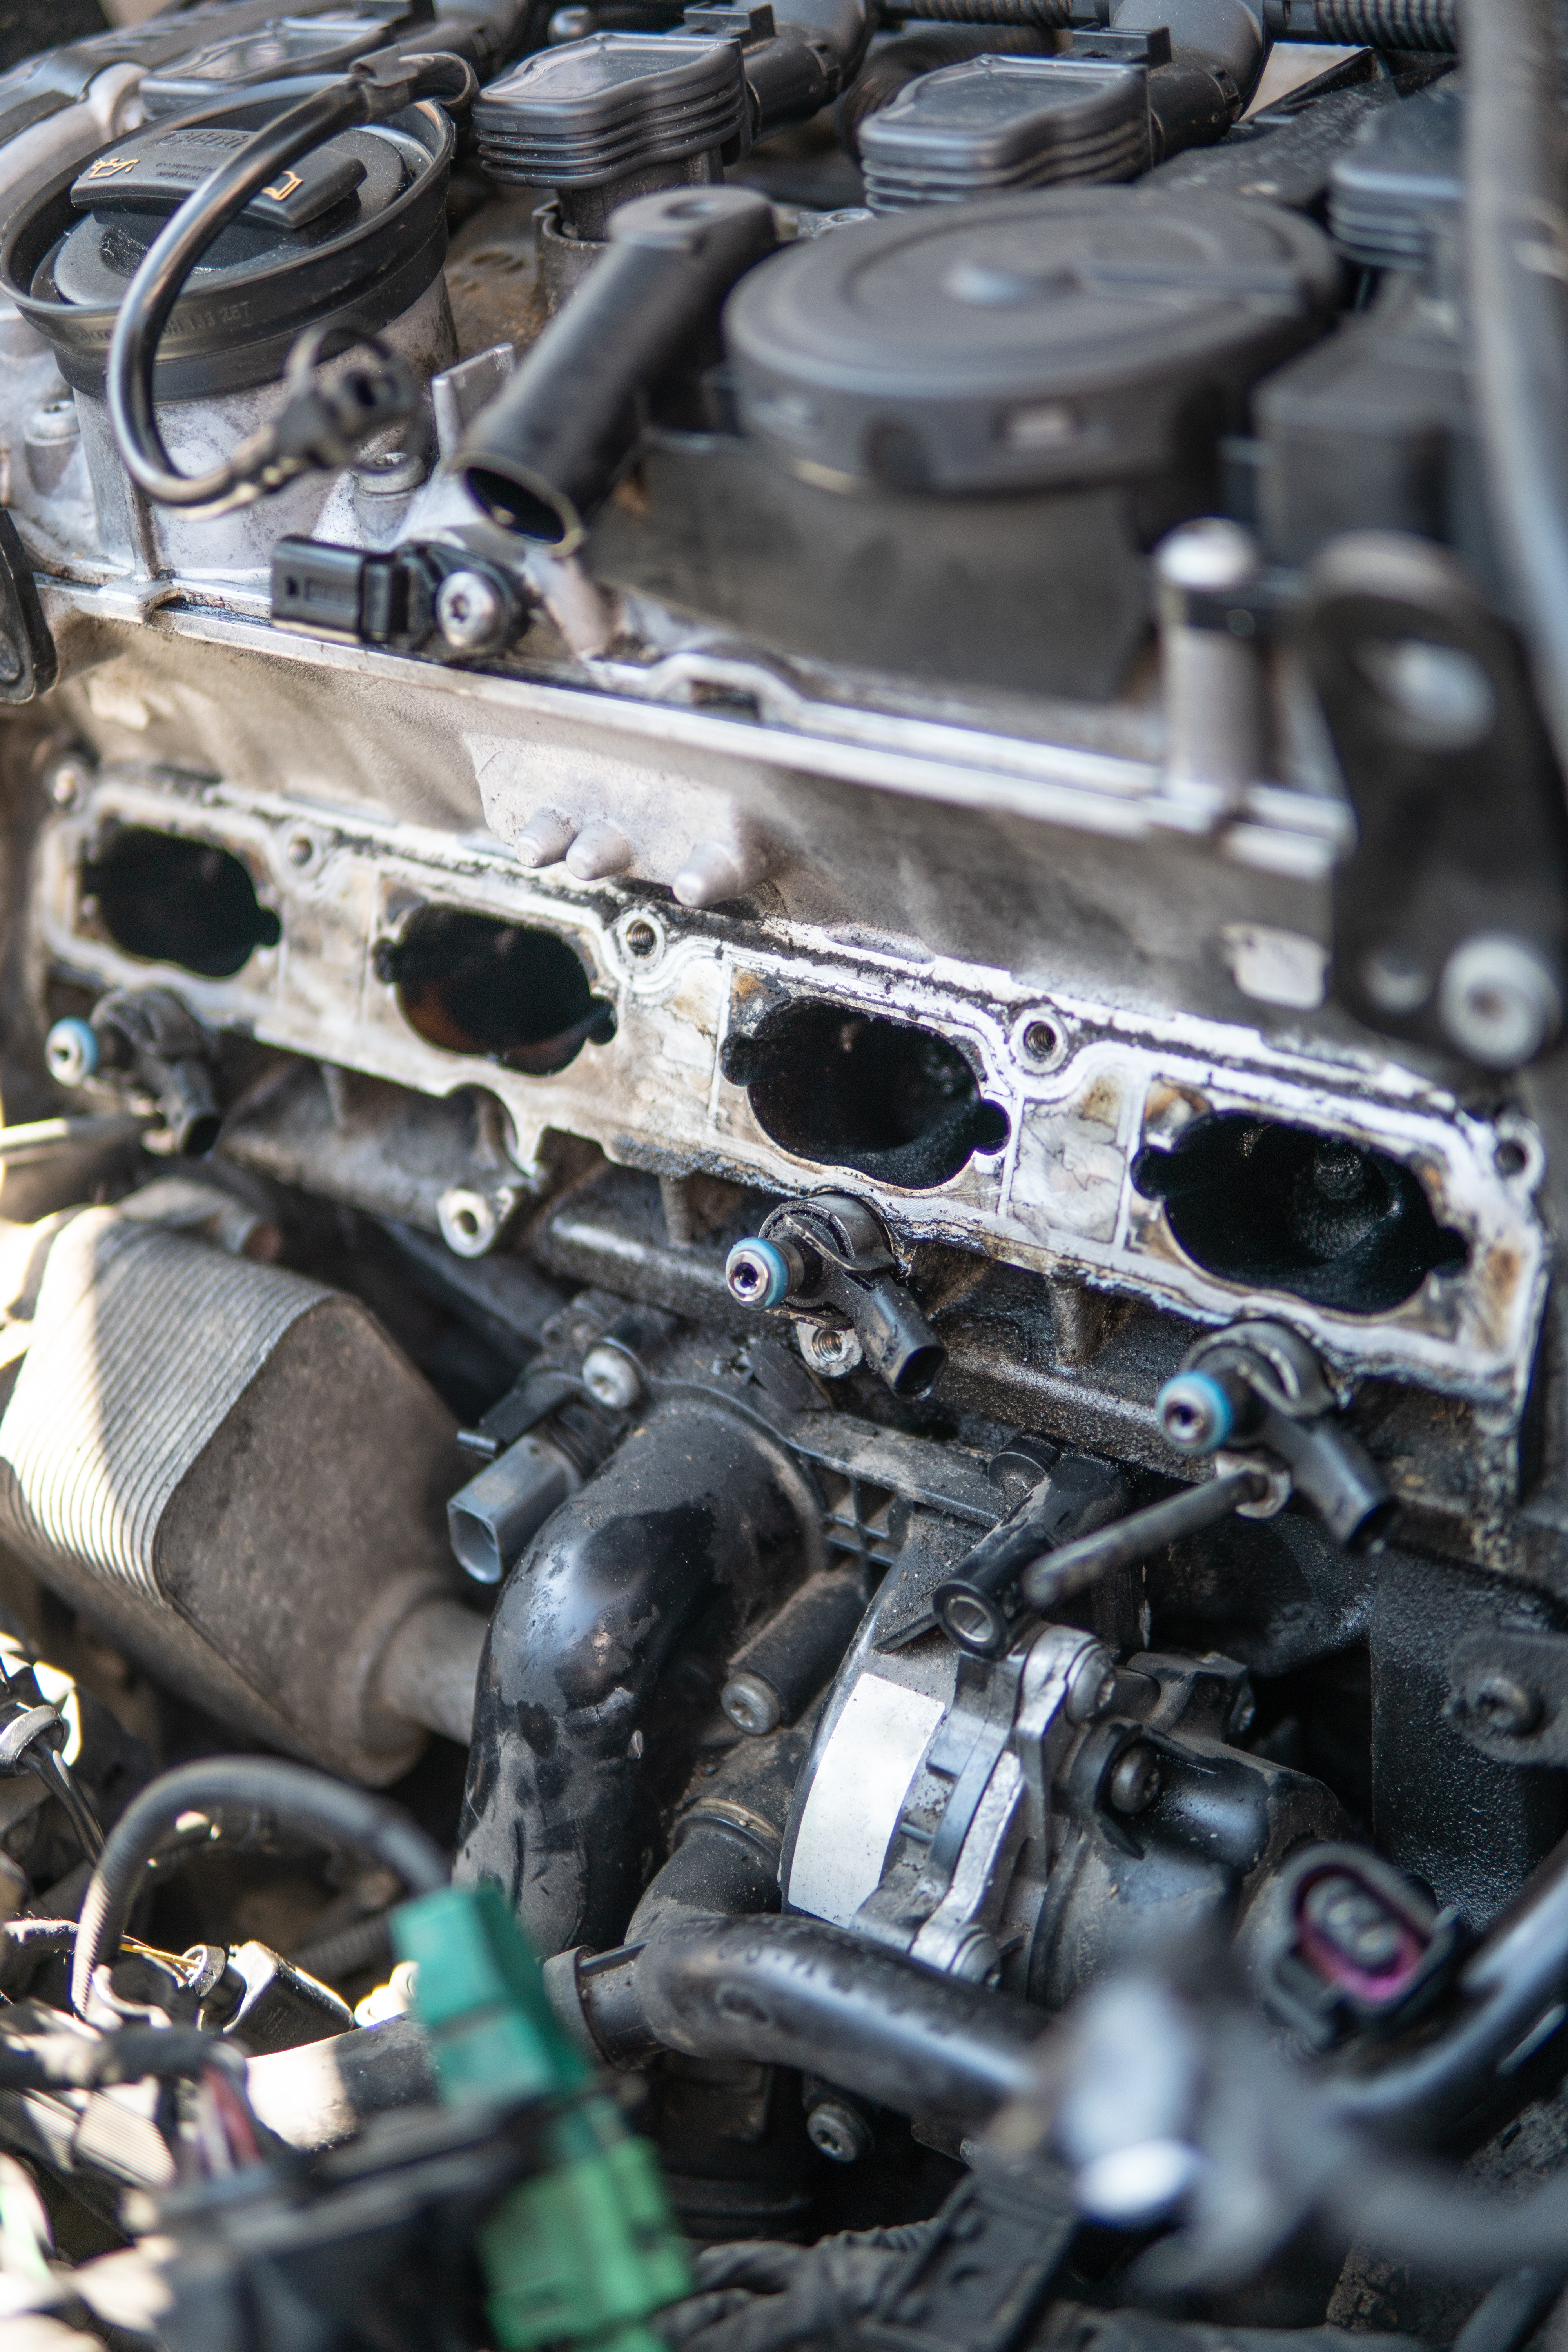 An image of a dirty intake manifold but DPF Alternatives can help with our expert intake manifold cleaning service in Los Angeles, CA.